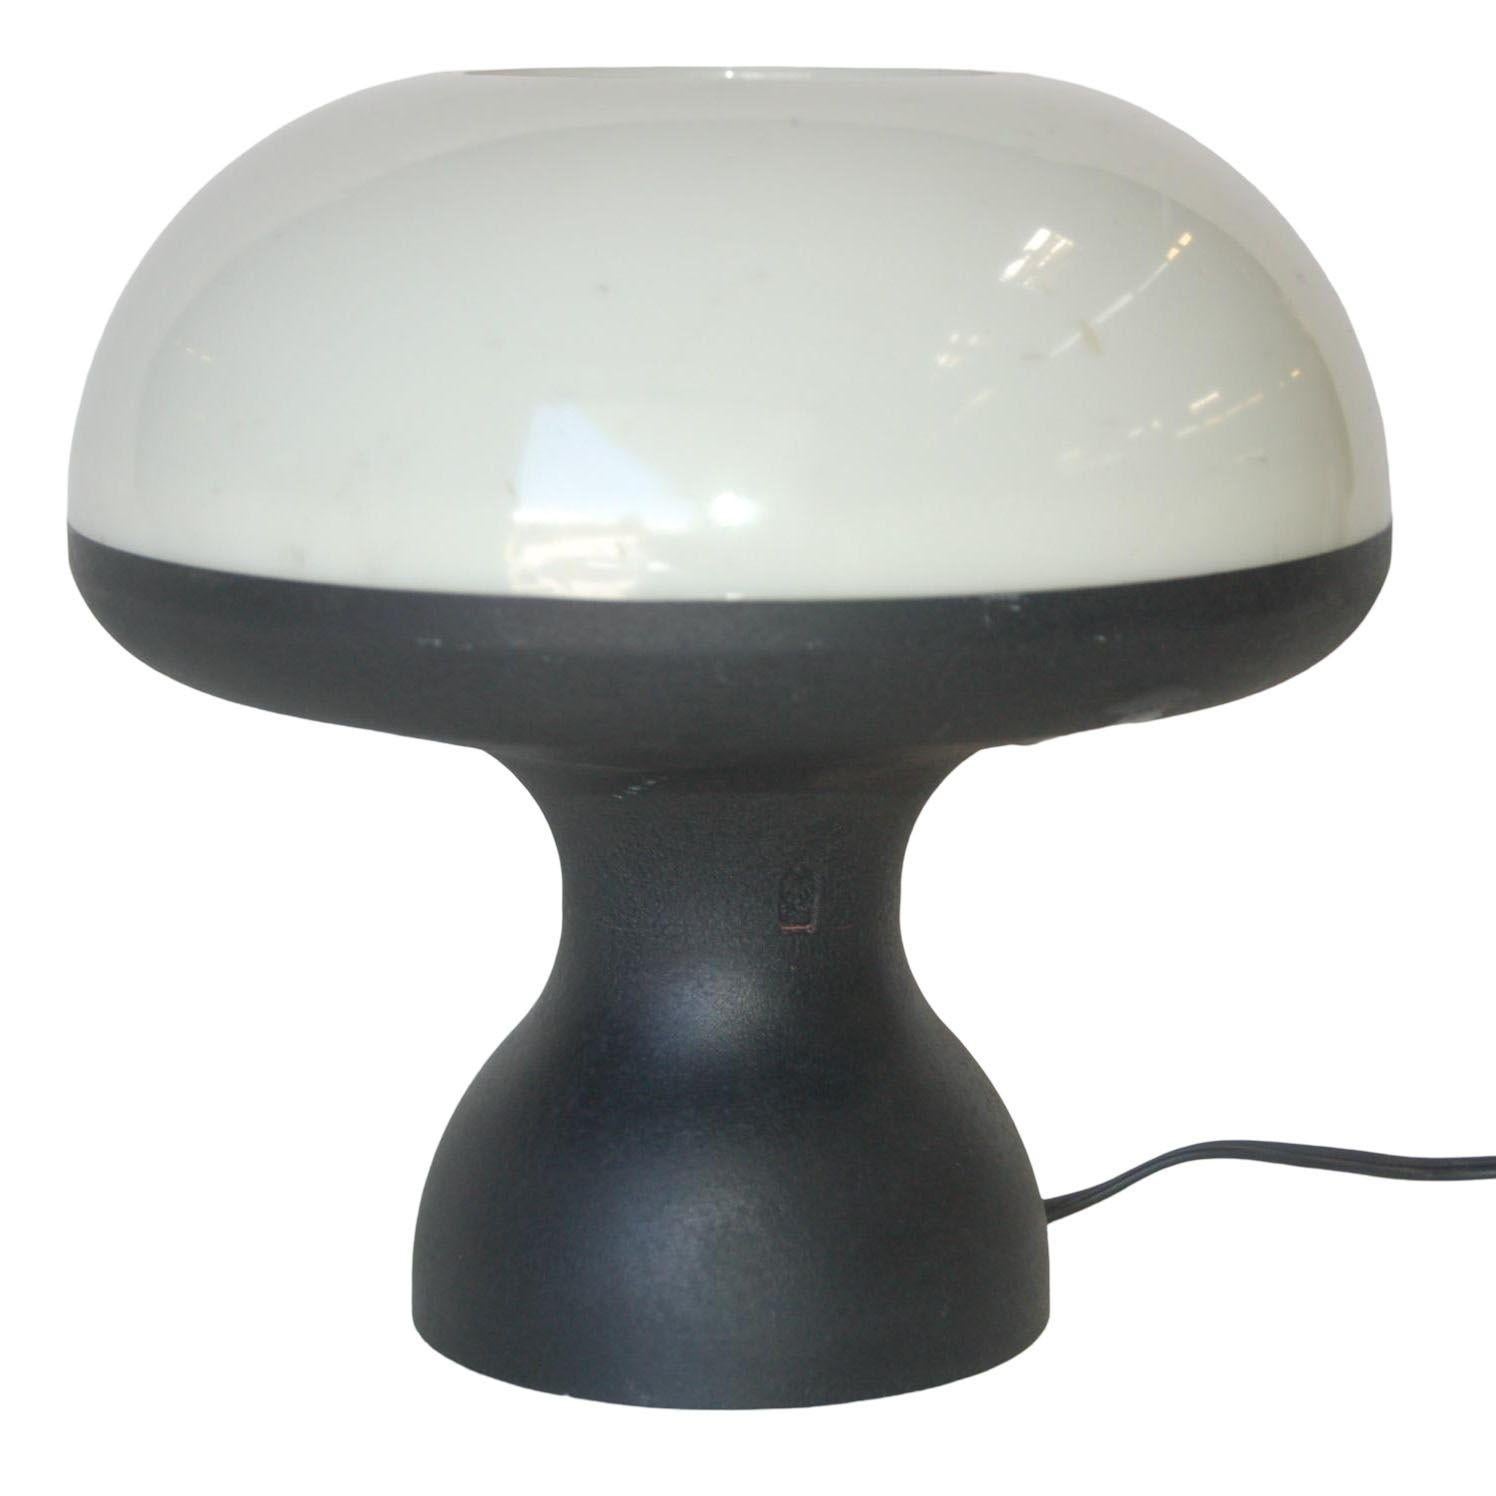 1960s Space Age illuminating modern mushroom acrylic accent table lamp with warm soft ambient light. Measures 10